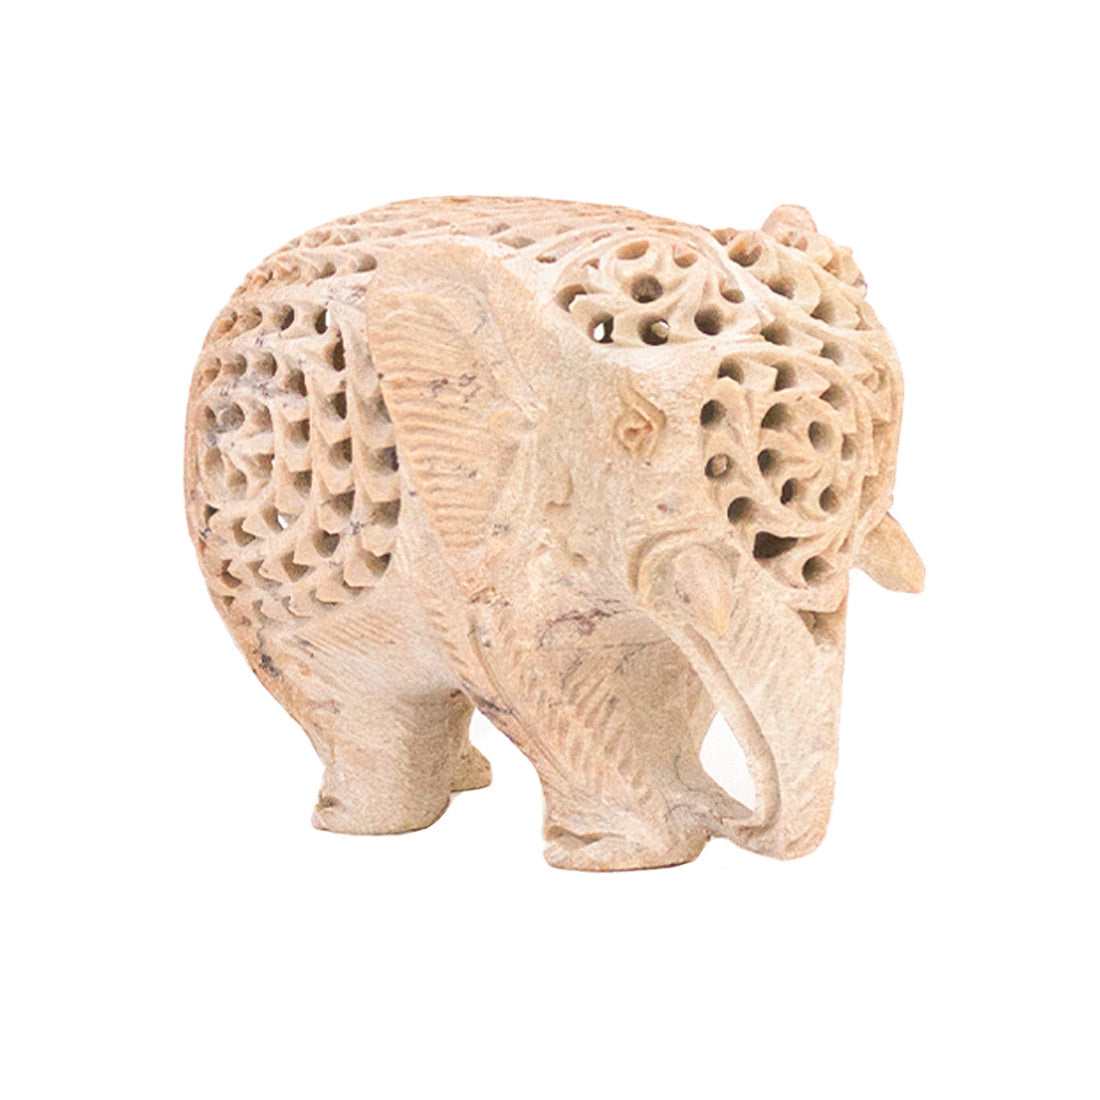 An Intricately Hand Carved Elephant Sculpture